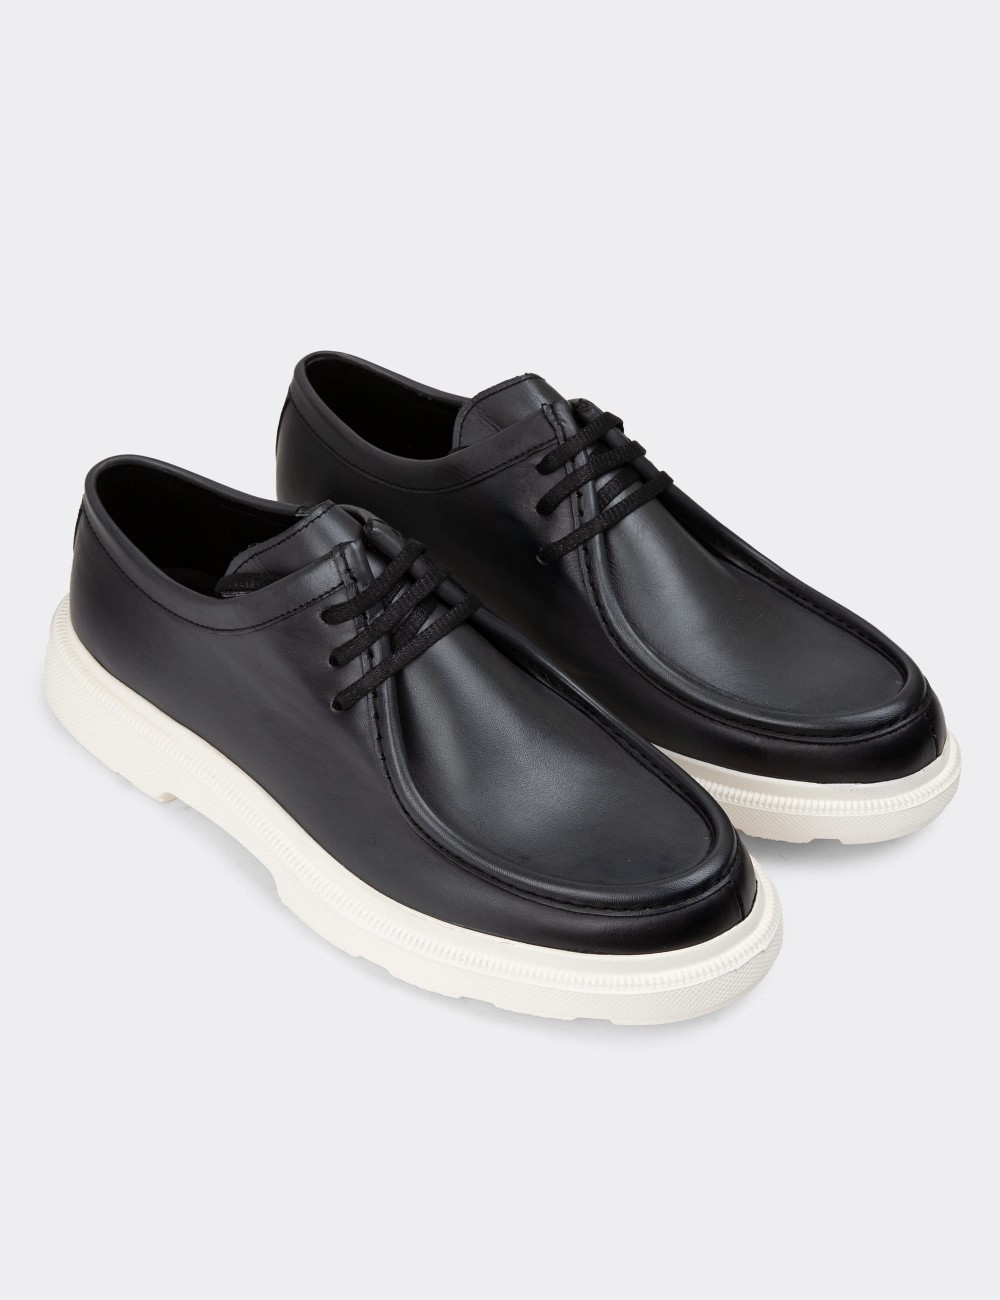 Gray Leather Lace-up Shoes - 01851MGRIP02